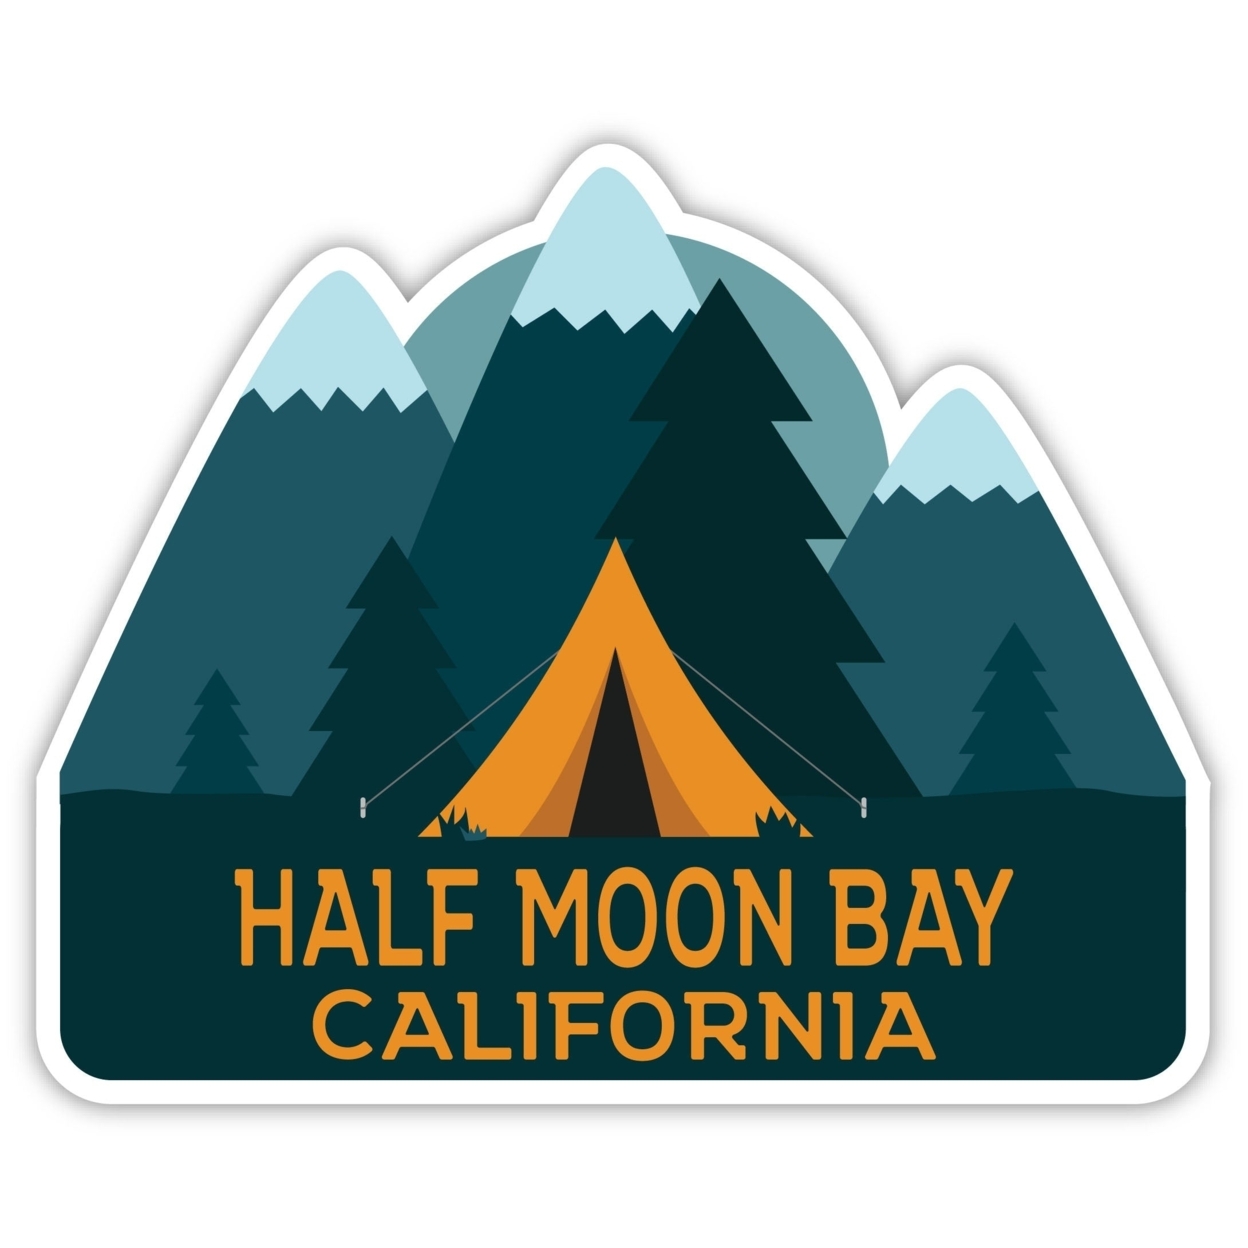 Half Moon Bay California Souvenir Decorative Stickers (Choose Theme And Size) - 4-Pack, 6-Inch, Bear